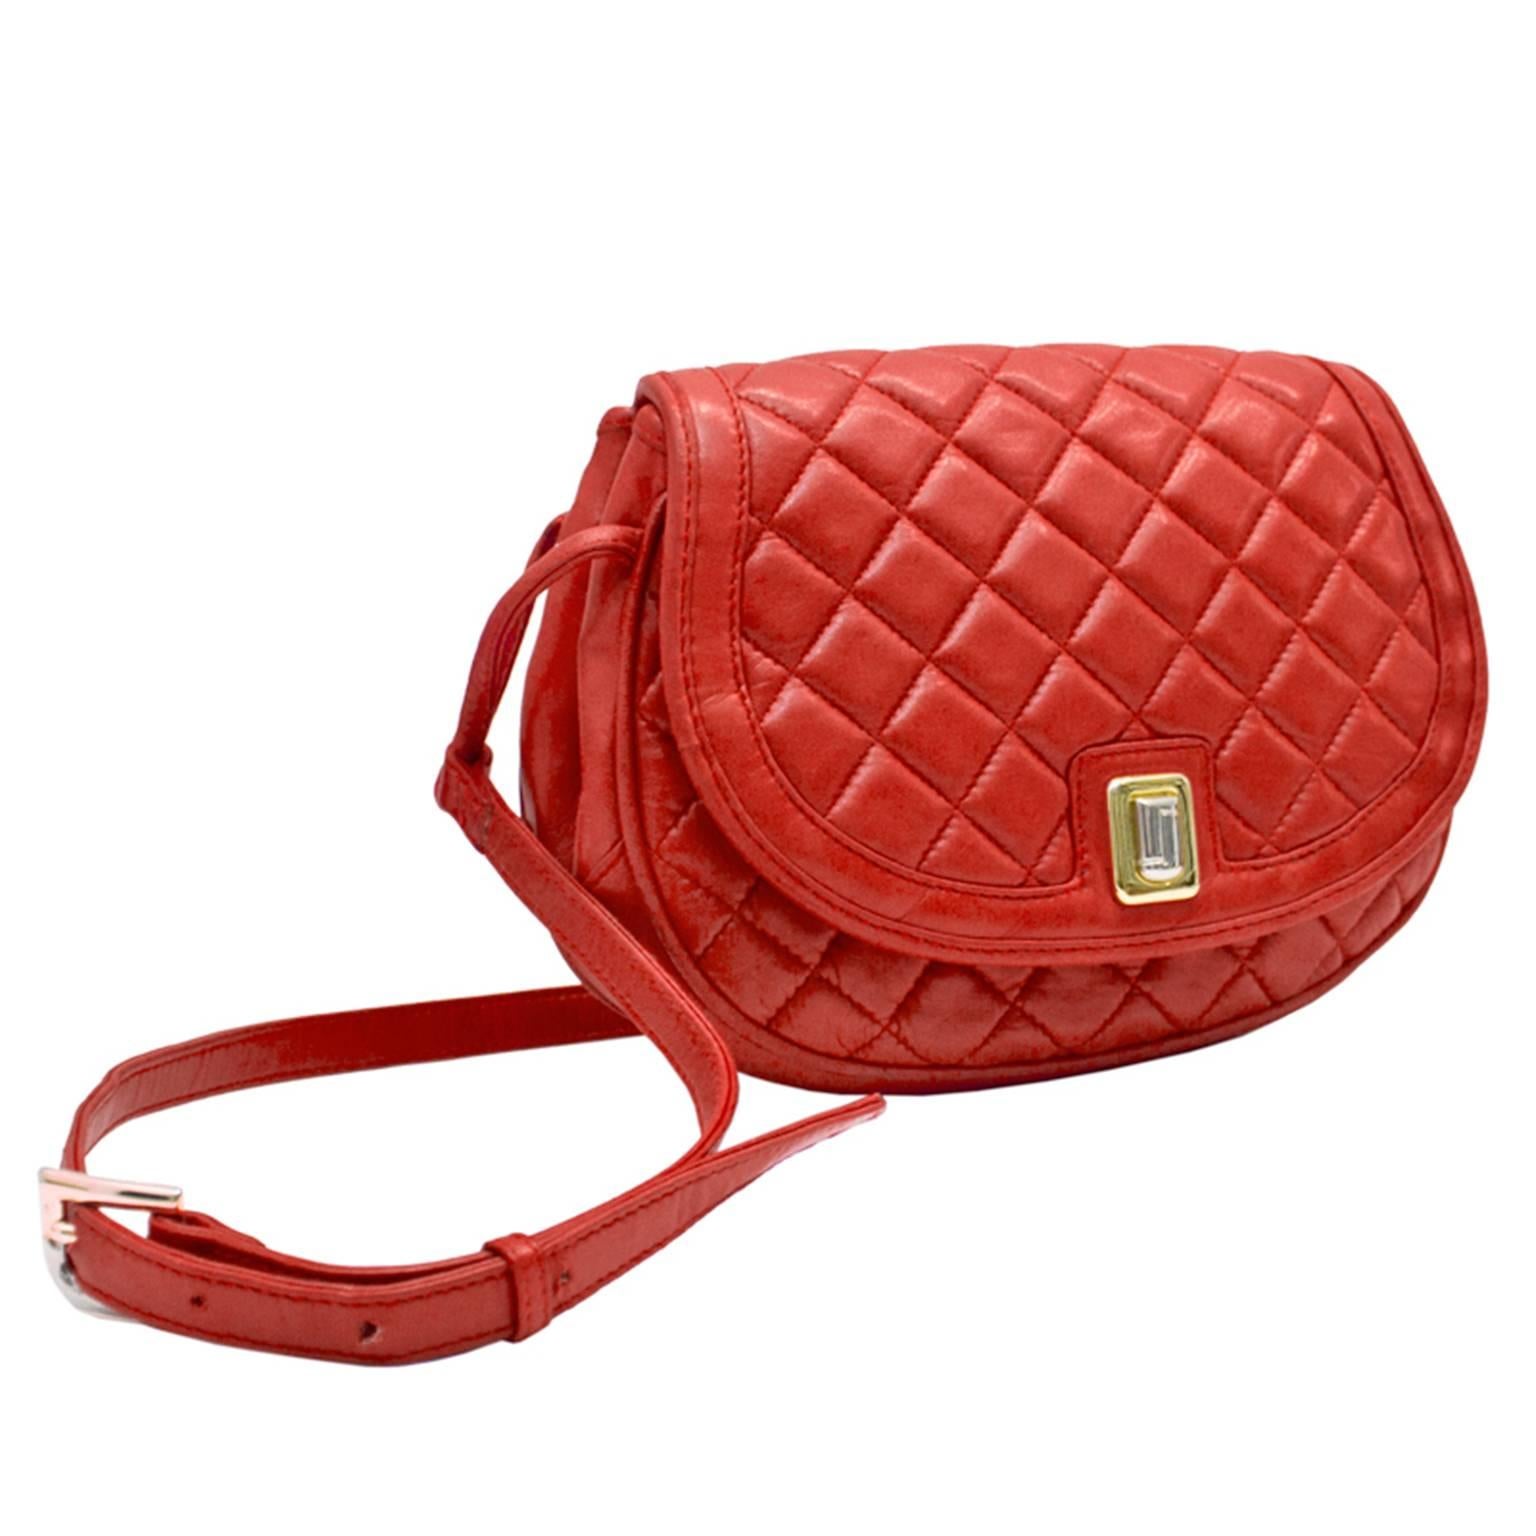 Vintage Judith Leiber butter soft red quilted lambskin cross body shoulder bag. Dates from the 1980's with gold plated hardware and full leather lining. More day bag than evening, this bag is a luxury item finished with the finest details.